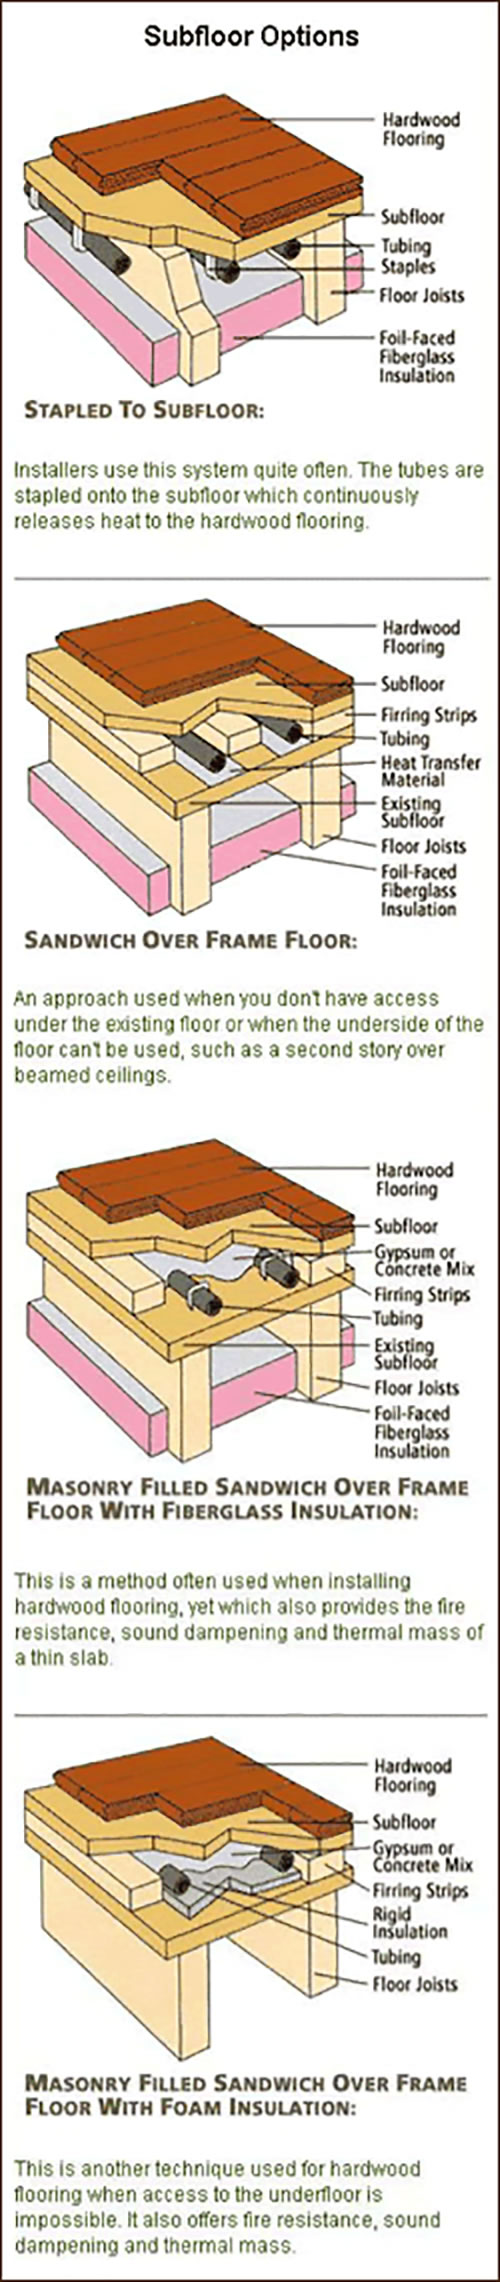 How To Install Hardwood Floors Over, Can You Install Engineered Hardwood Over Radiant Heater